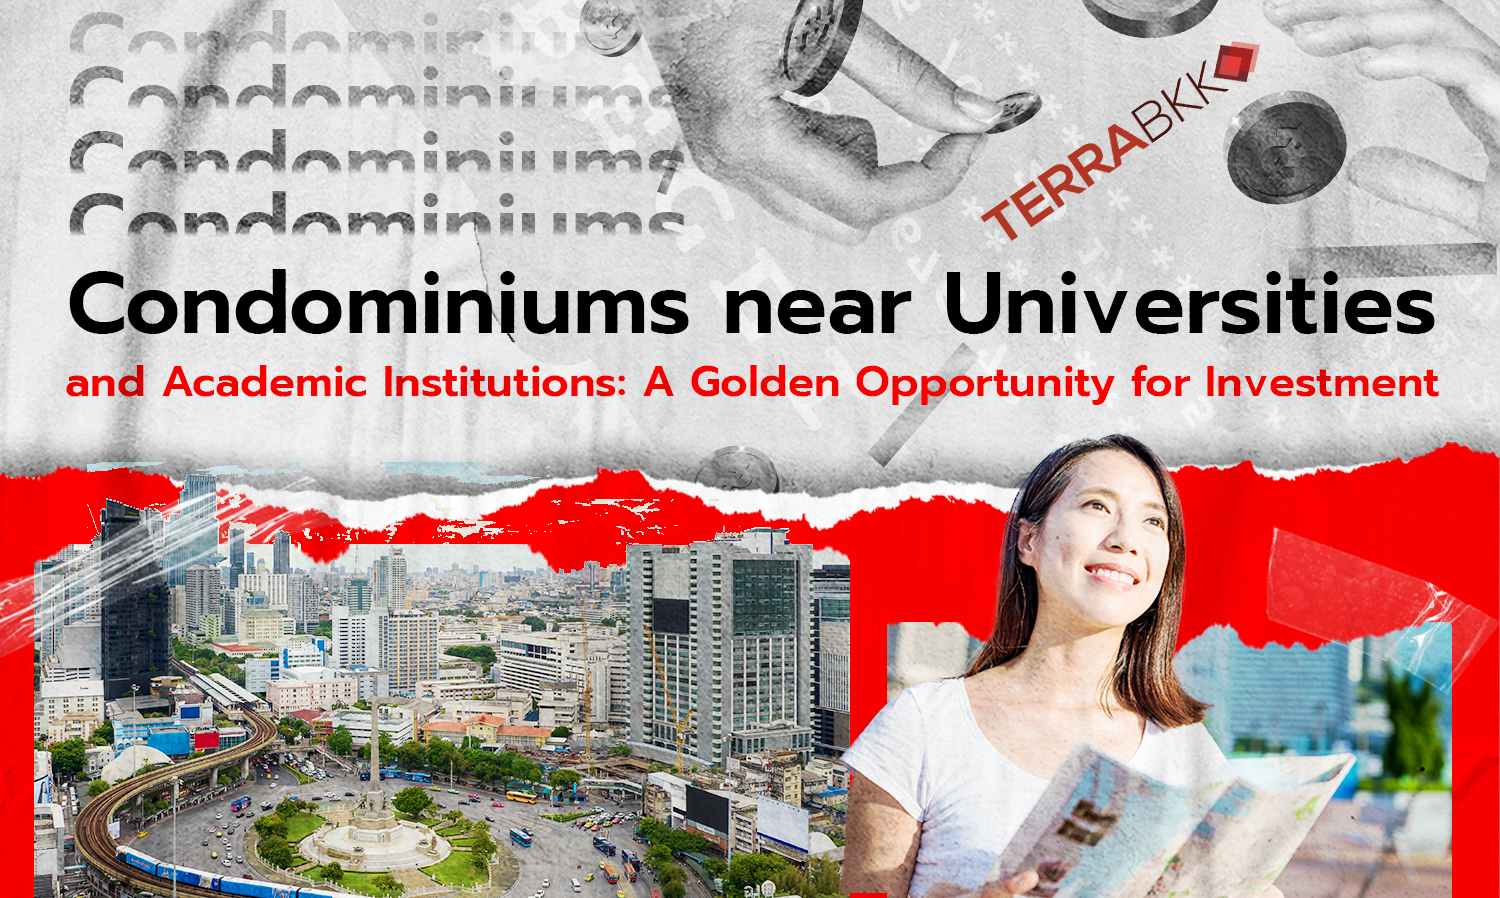 Condominiums near Universities and Academic Institutions: A Golden Opportunity for Investment